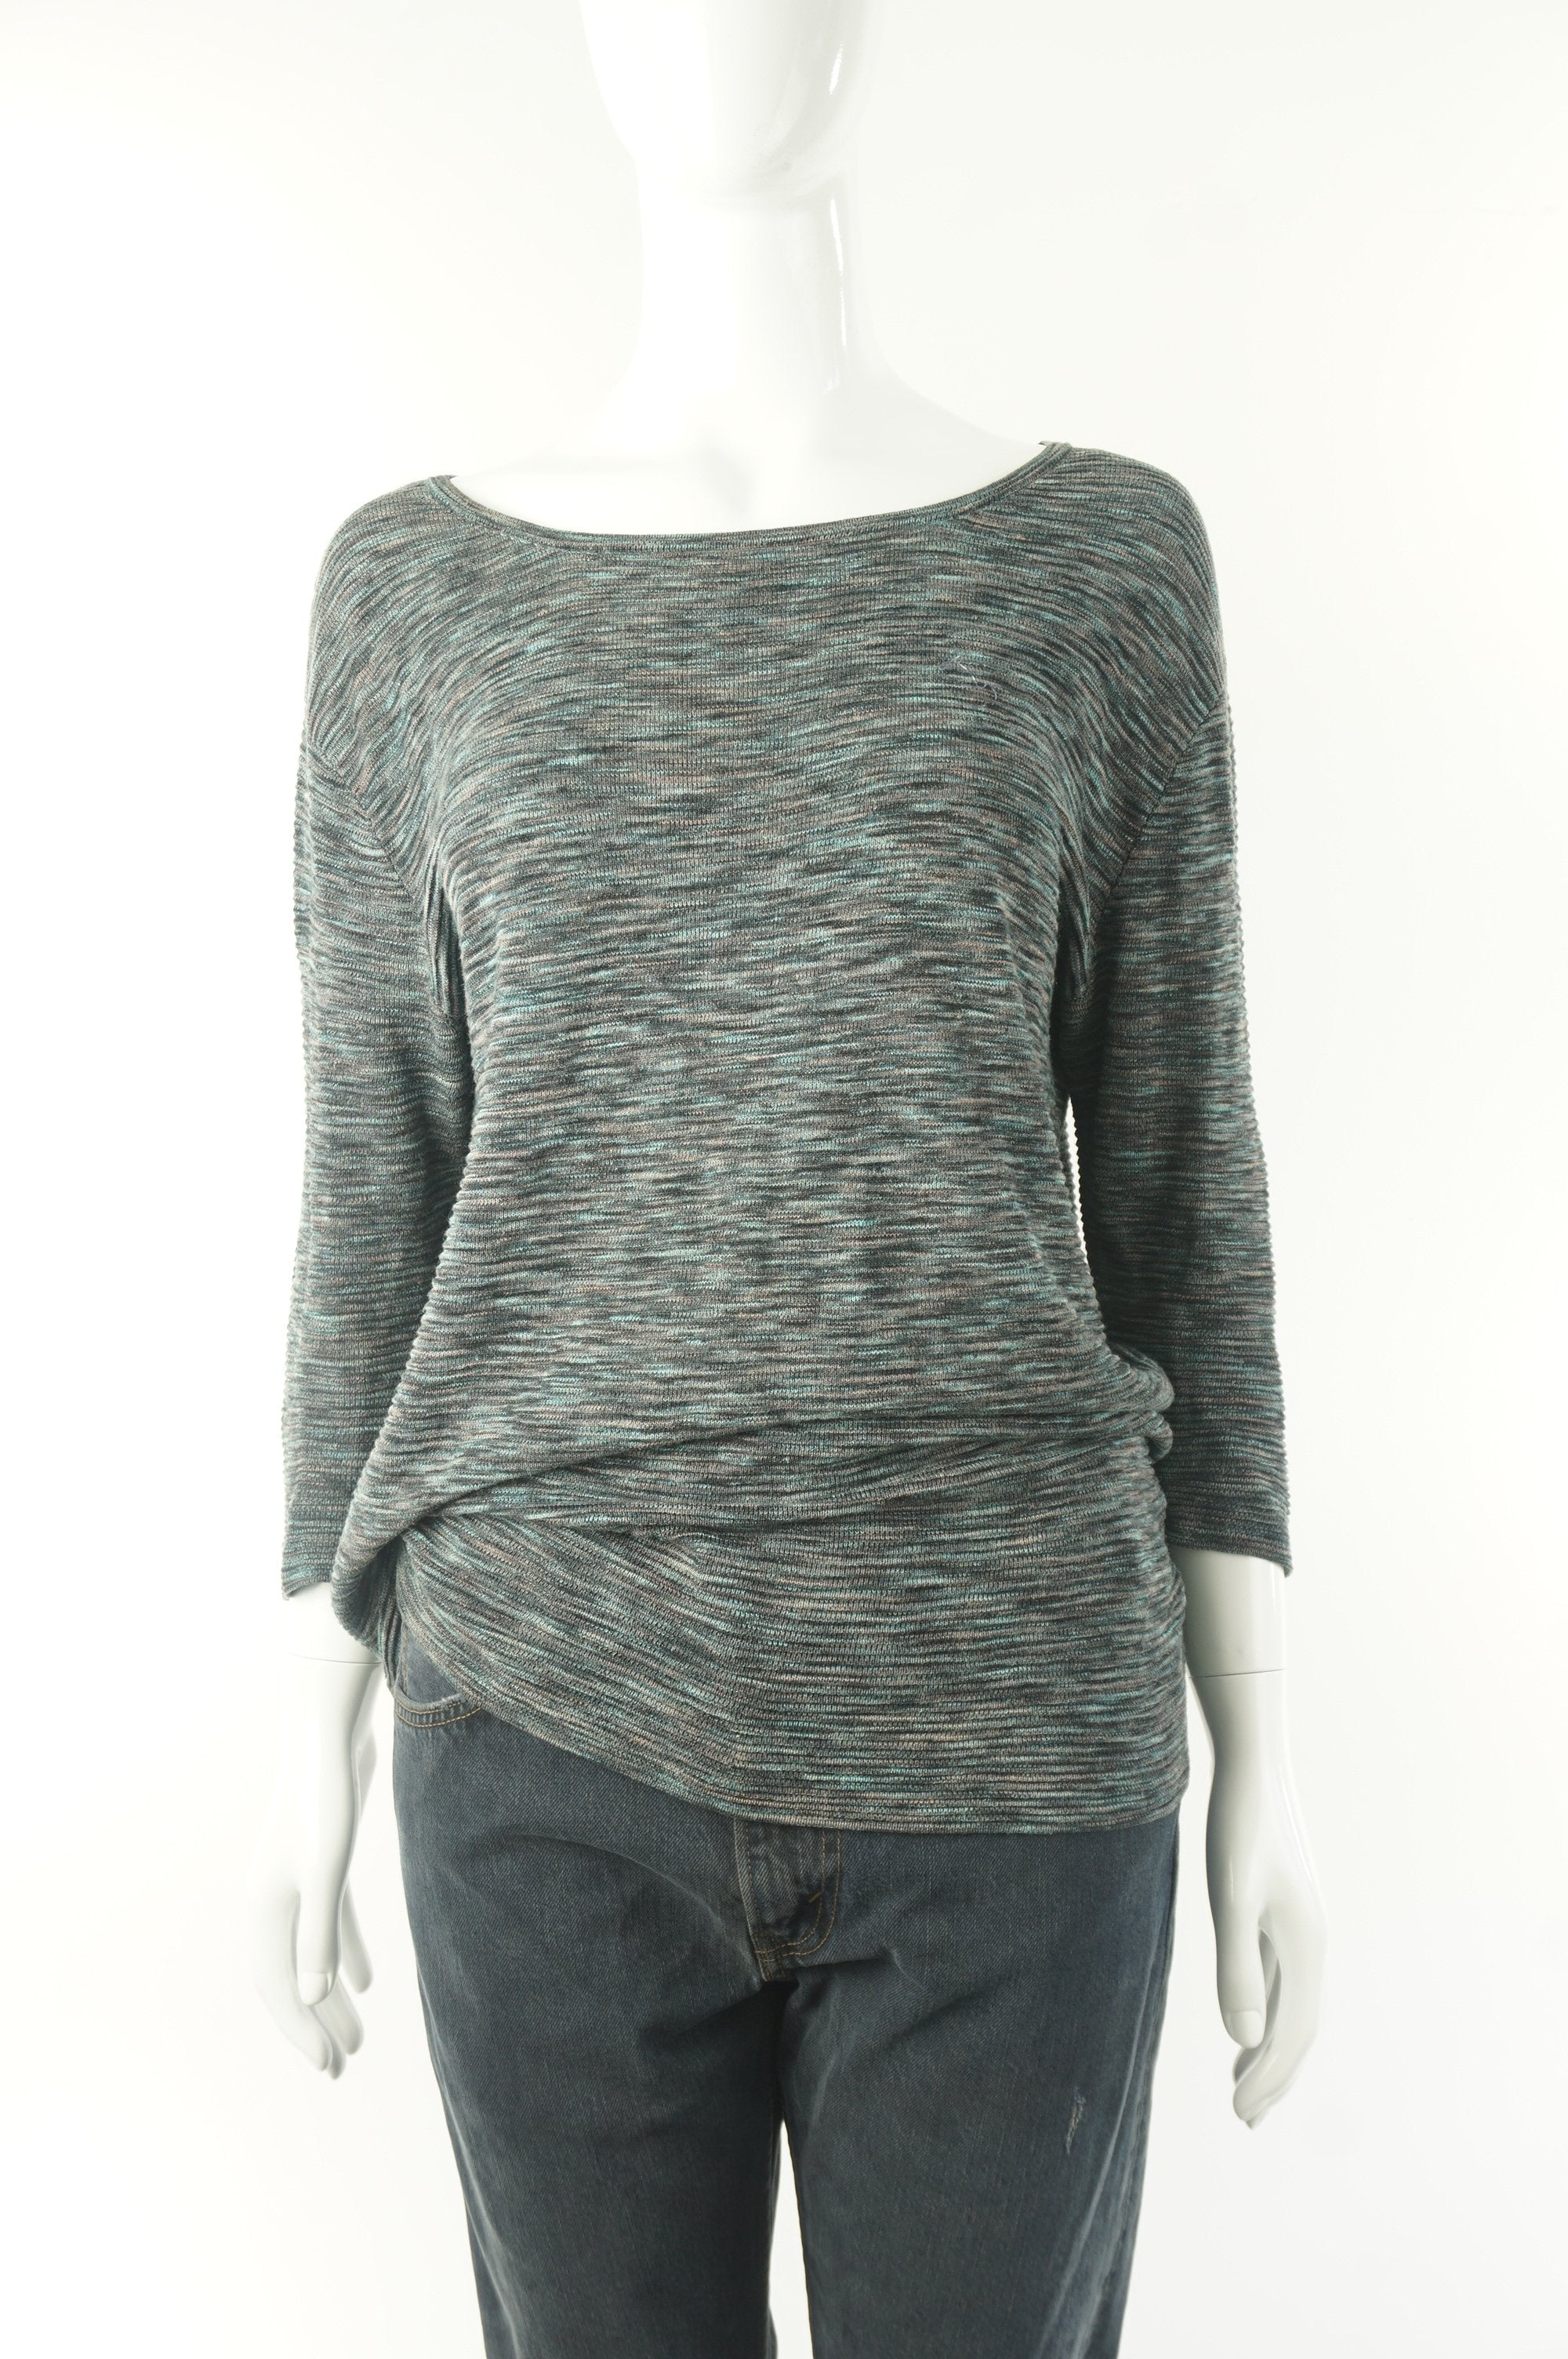 Wilfred Pullover Sweater, Relaxed fit with dropped shoulder. Perfect for everyday wear., Grey, Green, 68% viscose, 28% linen, 12% Nylon, women's Tops, women's Grey, Green Tops, Wilfred women's Tops, wilfred loose sweater, arizia women's loose fitting sweater, women's sweater, wilfred women's pullover